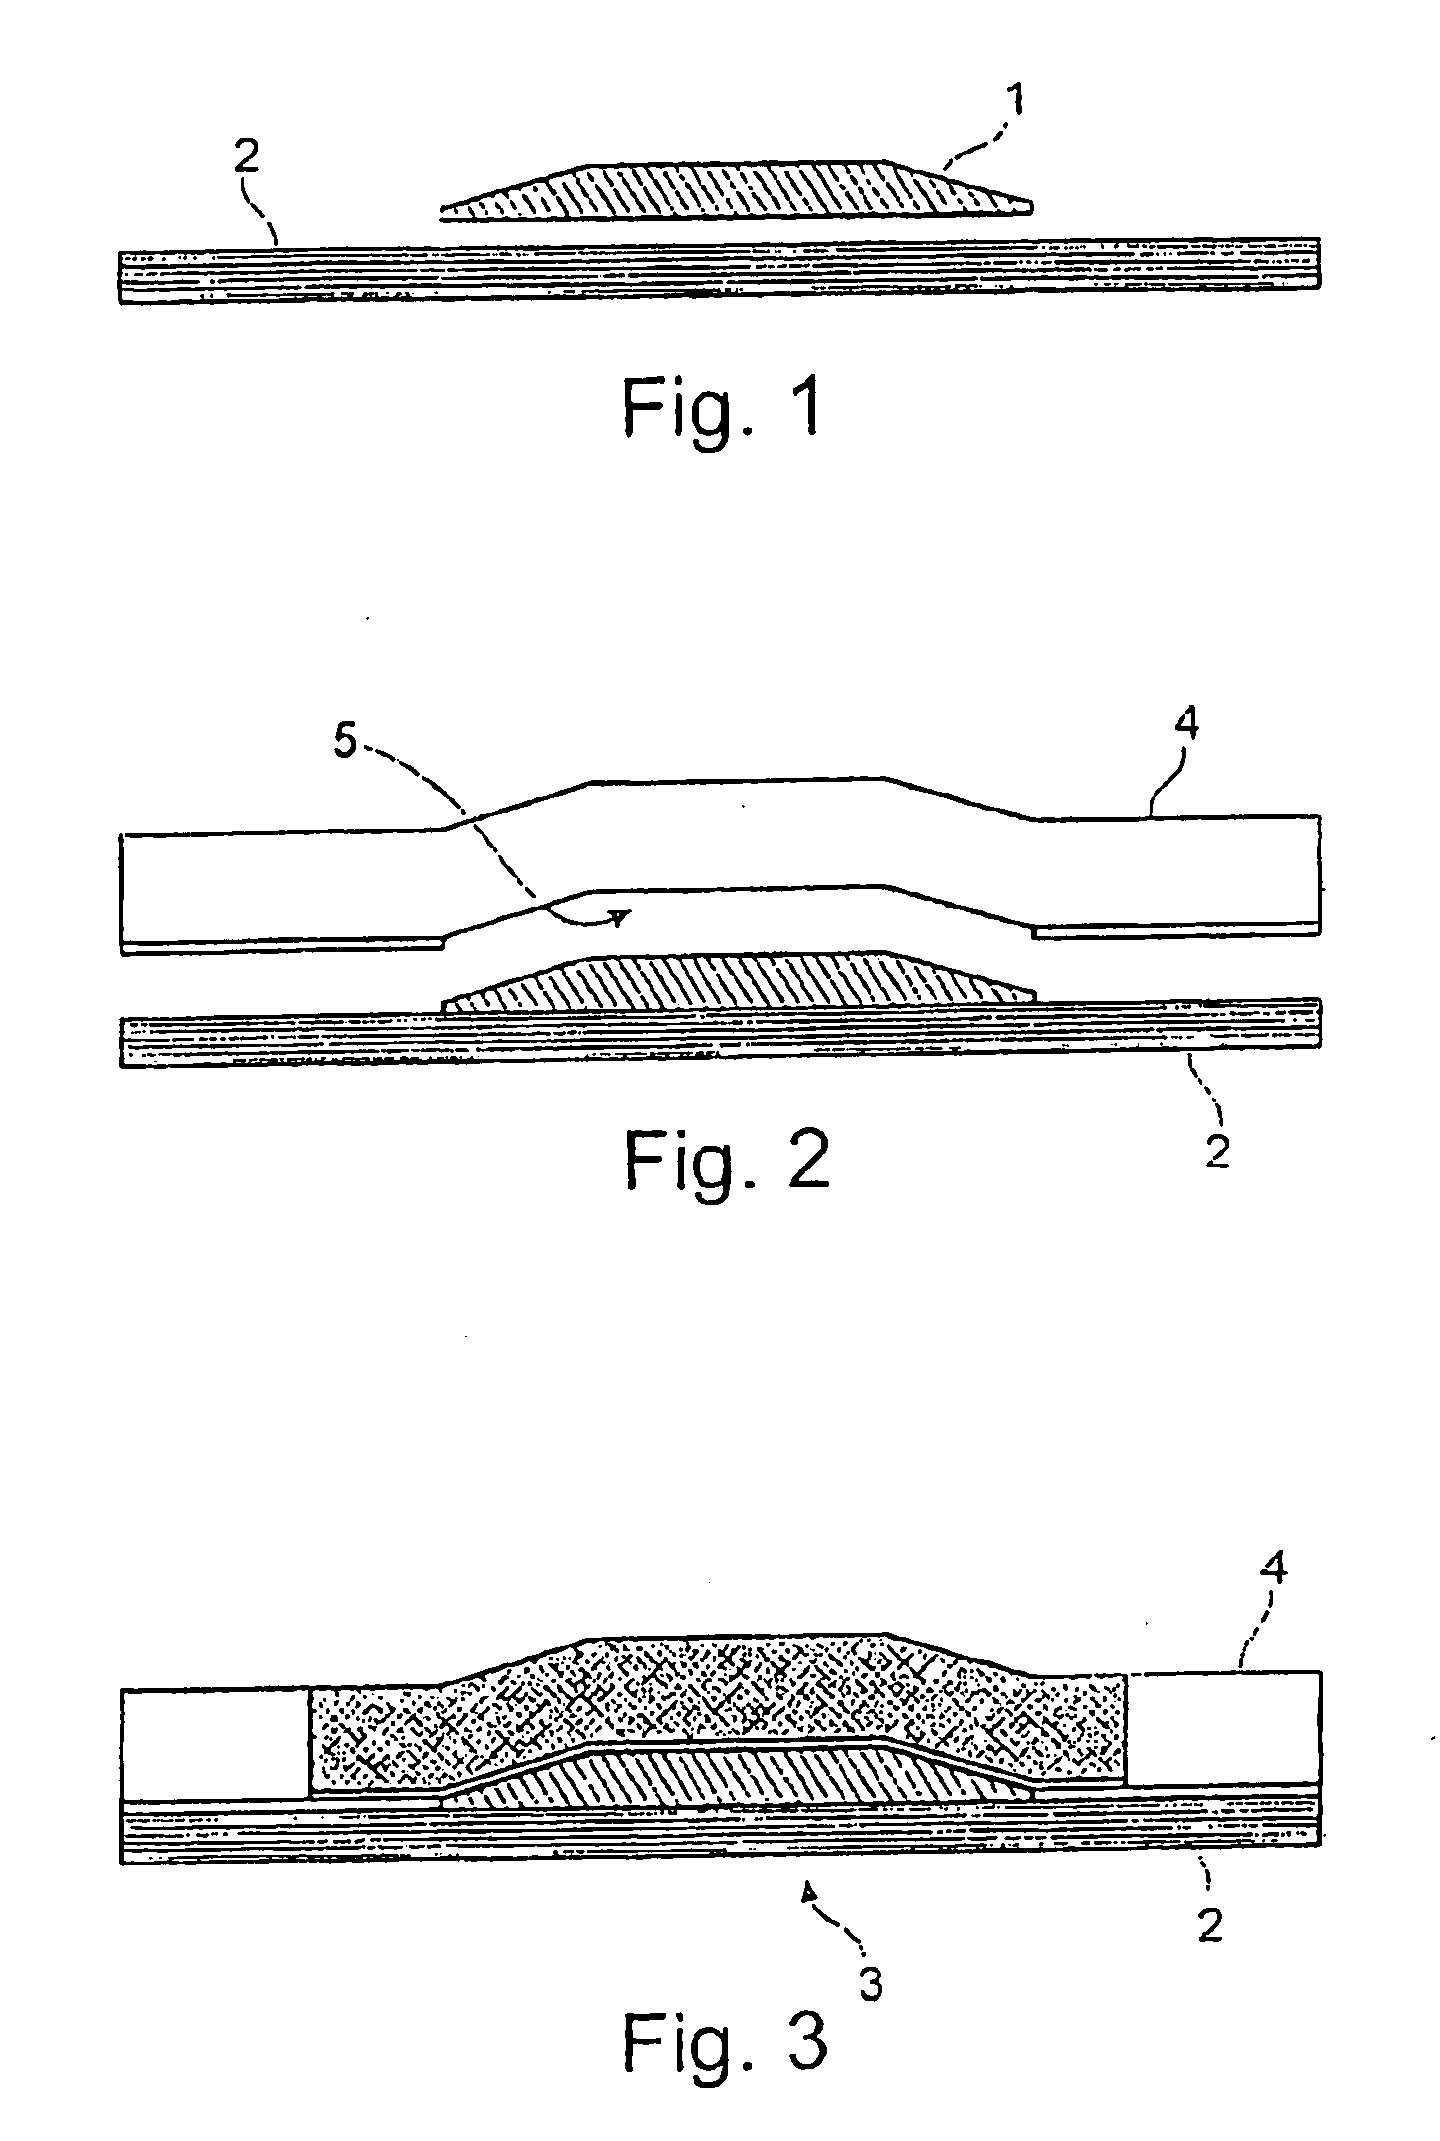 Process for Producing a Substantially Shell-Shaped Component